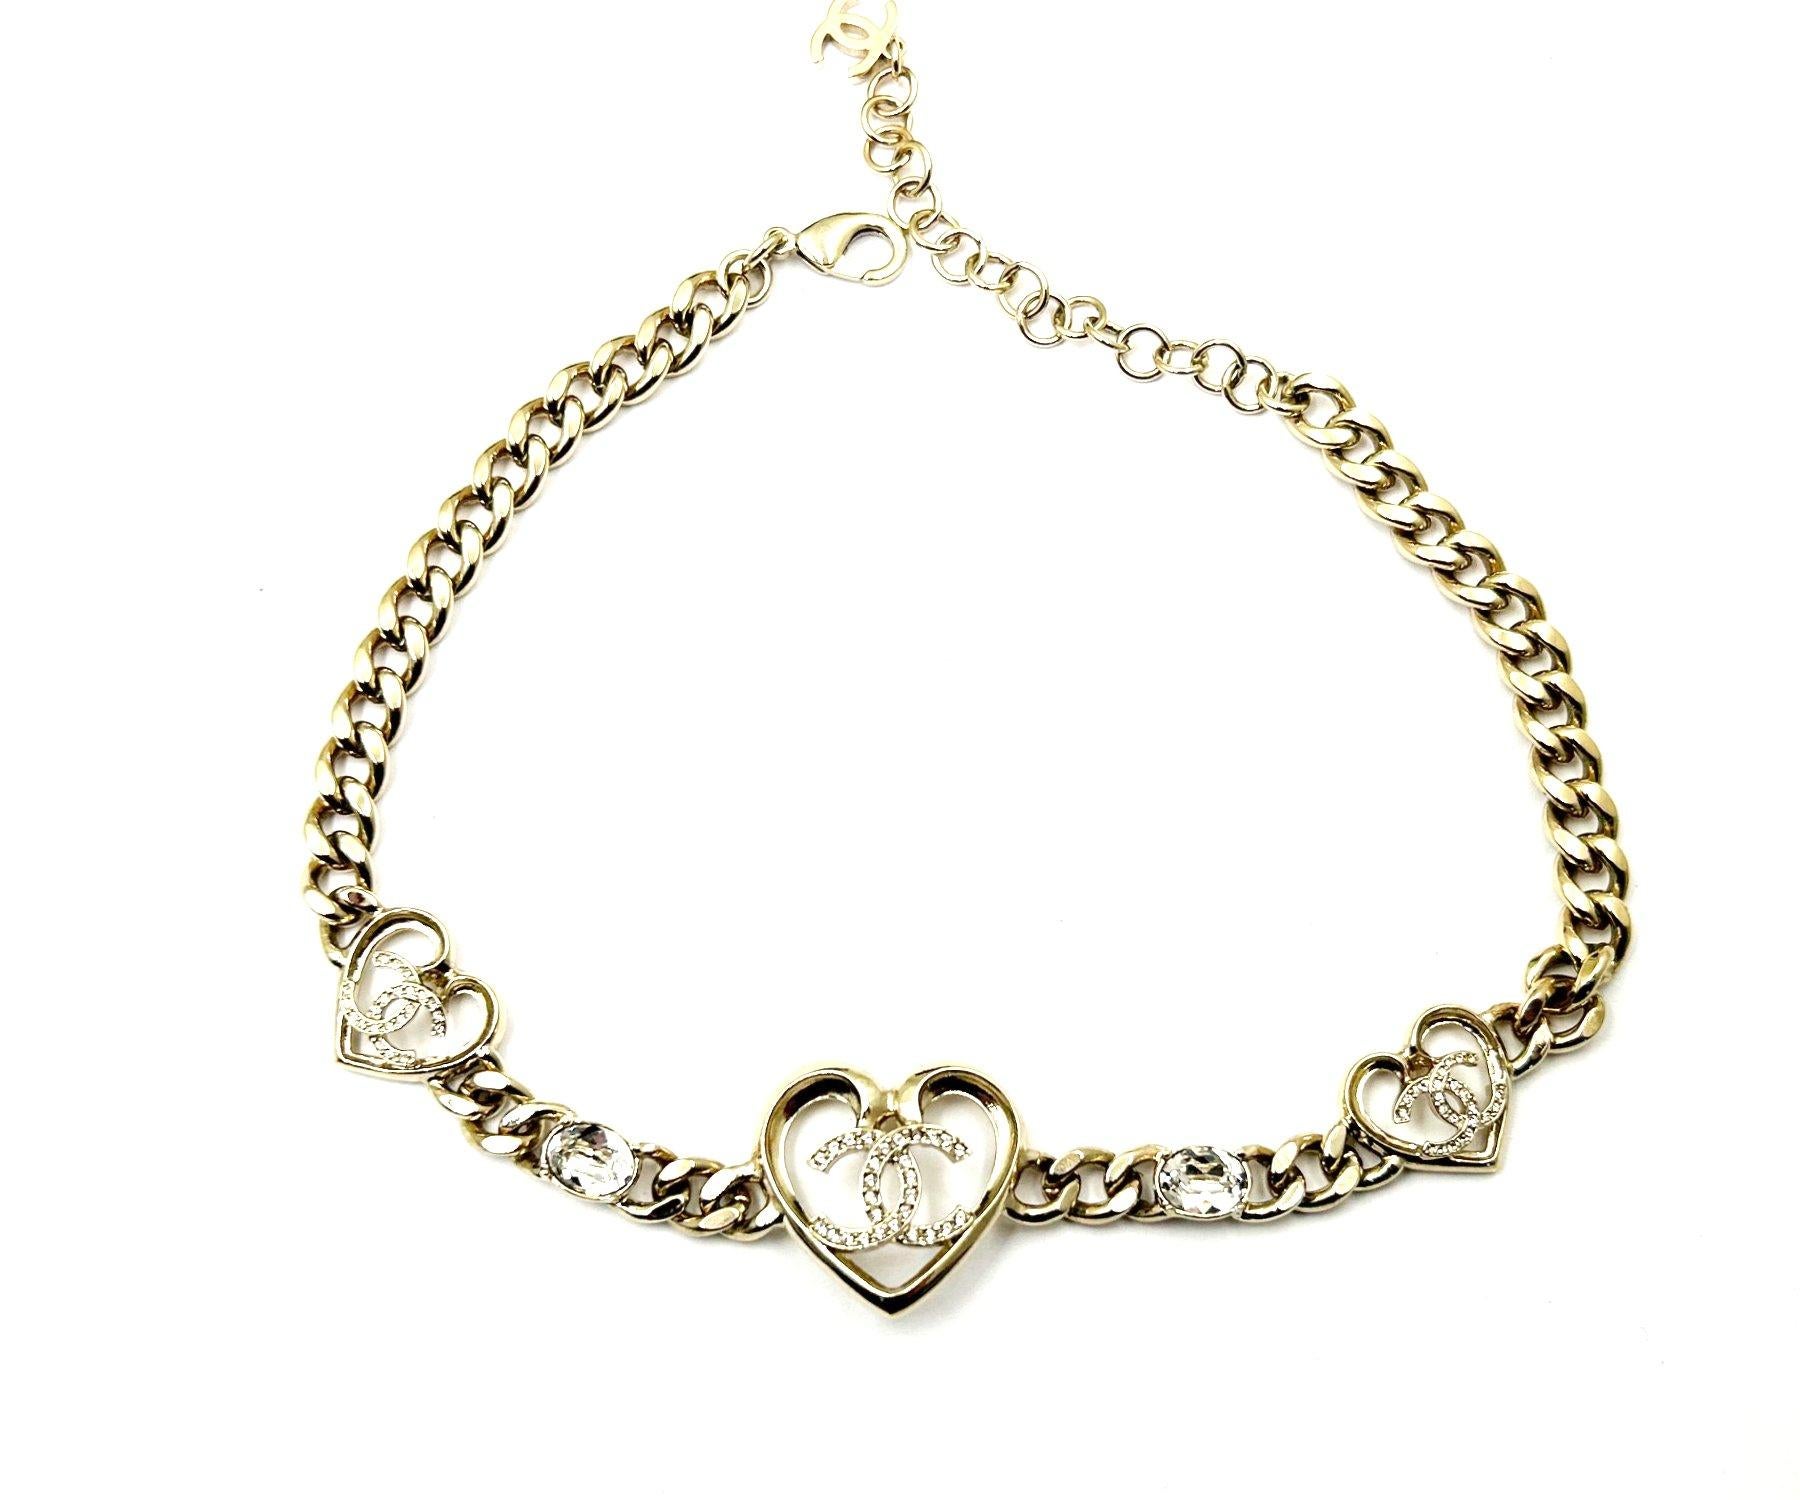 Chanel New Gold CC 3 Heart Crystal Chain Choker Necklace

*Marked 23
*Made in France
*Comes with the original box , pouch and booklet

-It is approximately 14.5